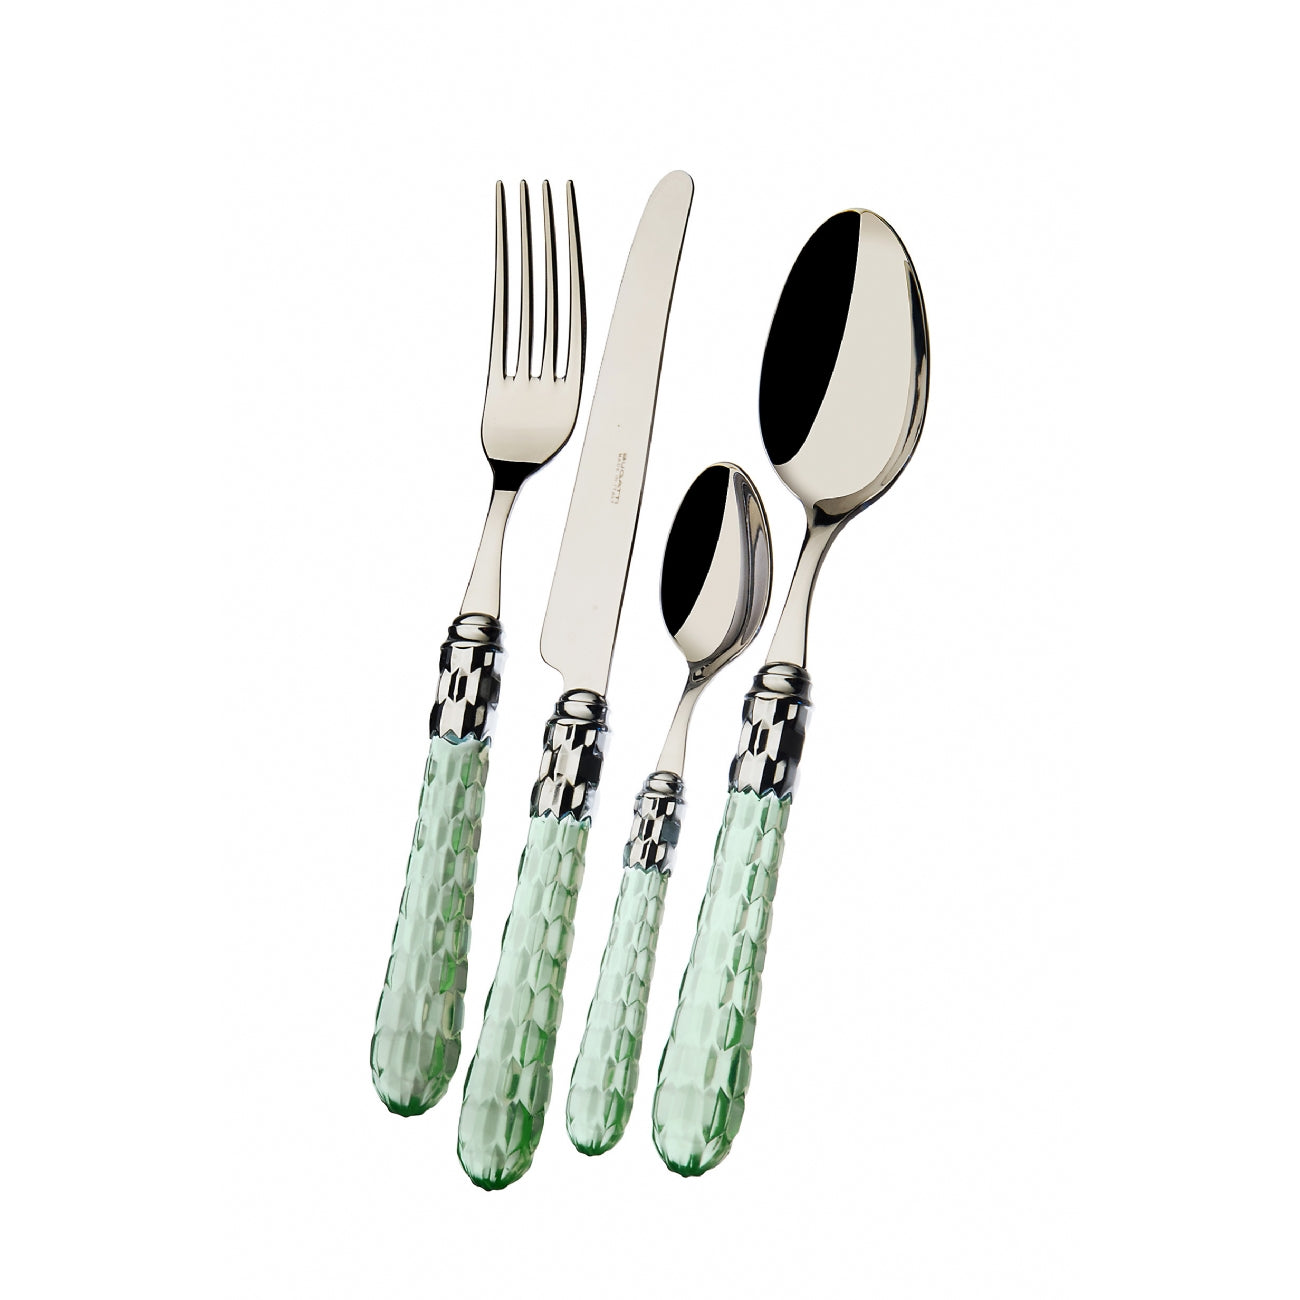 BUGATTI, Cristallo, 75-piece cutlery set in 18/10 stainless steel, chromed ring and green handle